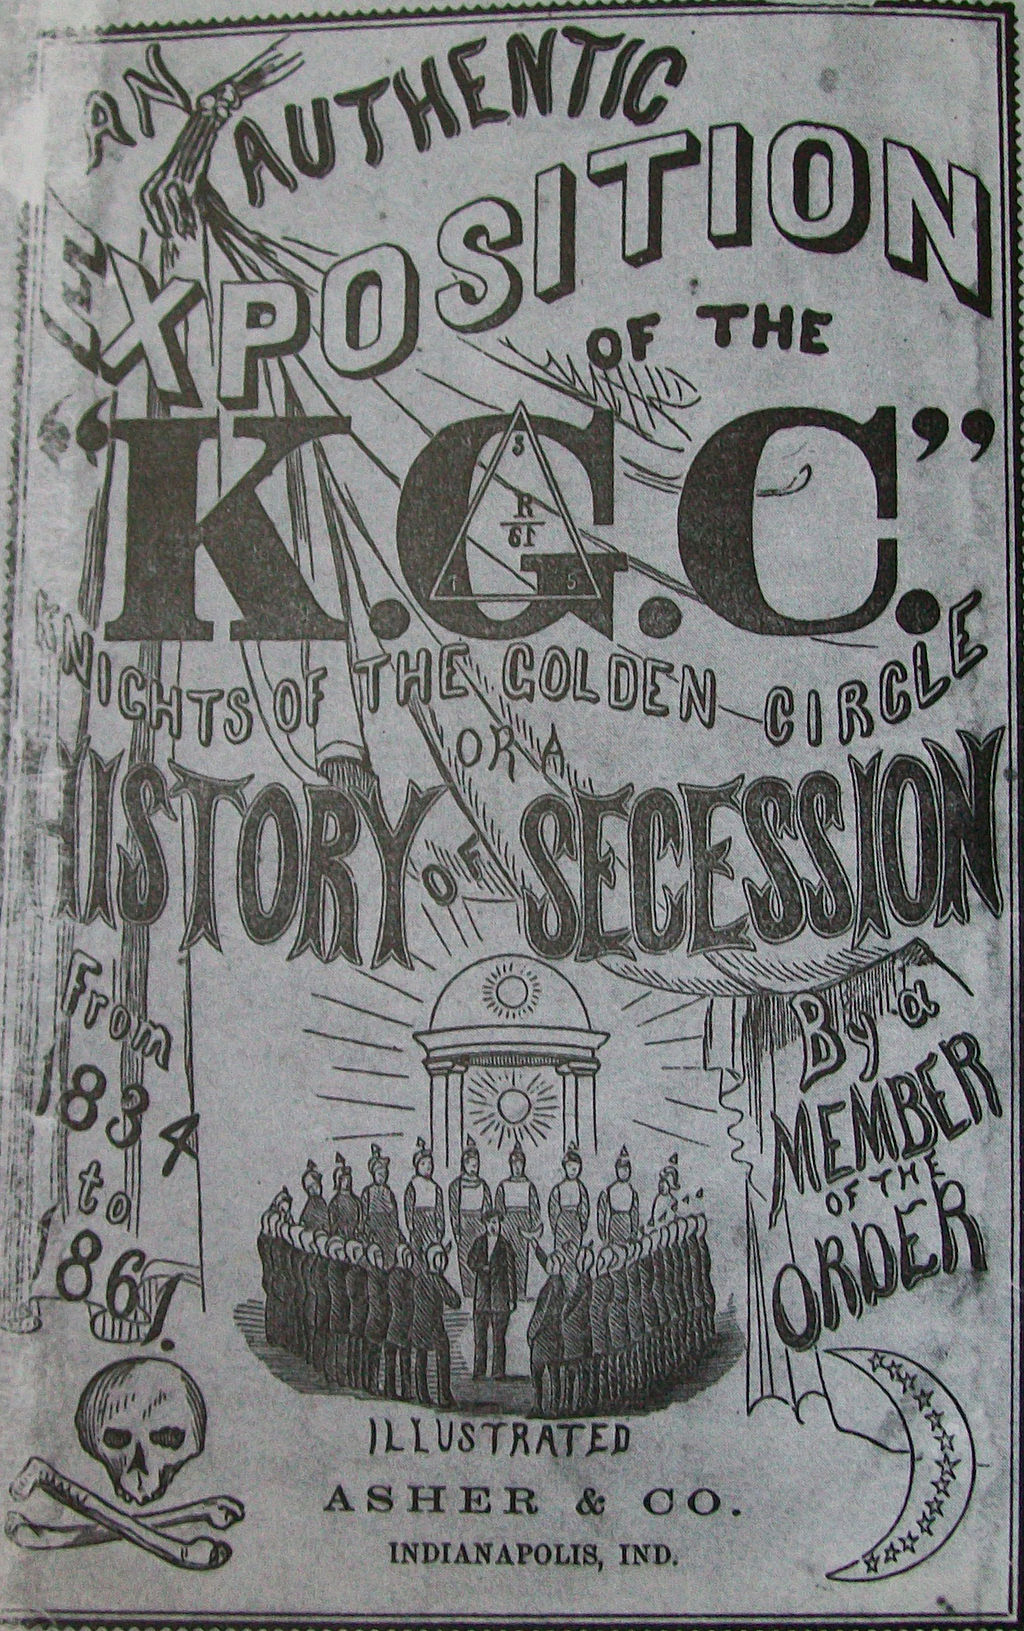 Picture of the front cover of the book which reads "An Authentic Exposition of the K.G.C. Knights of the Golden Circle or a History of Succession By a Member of the Order". Below that is a drawing of several men wearing helmets and forming a circle around another man.